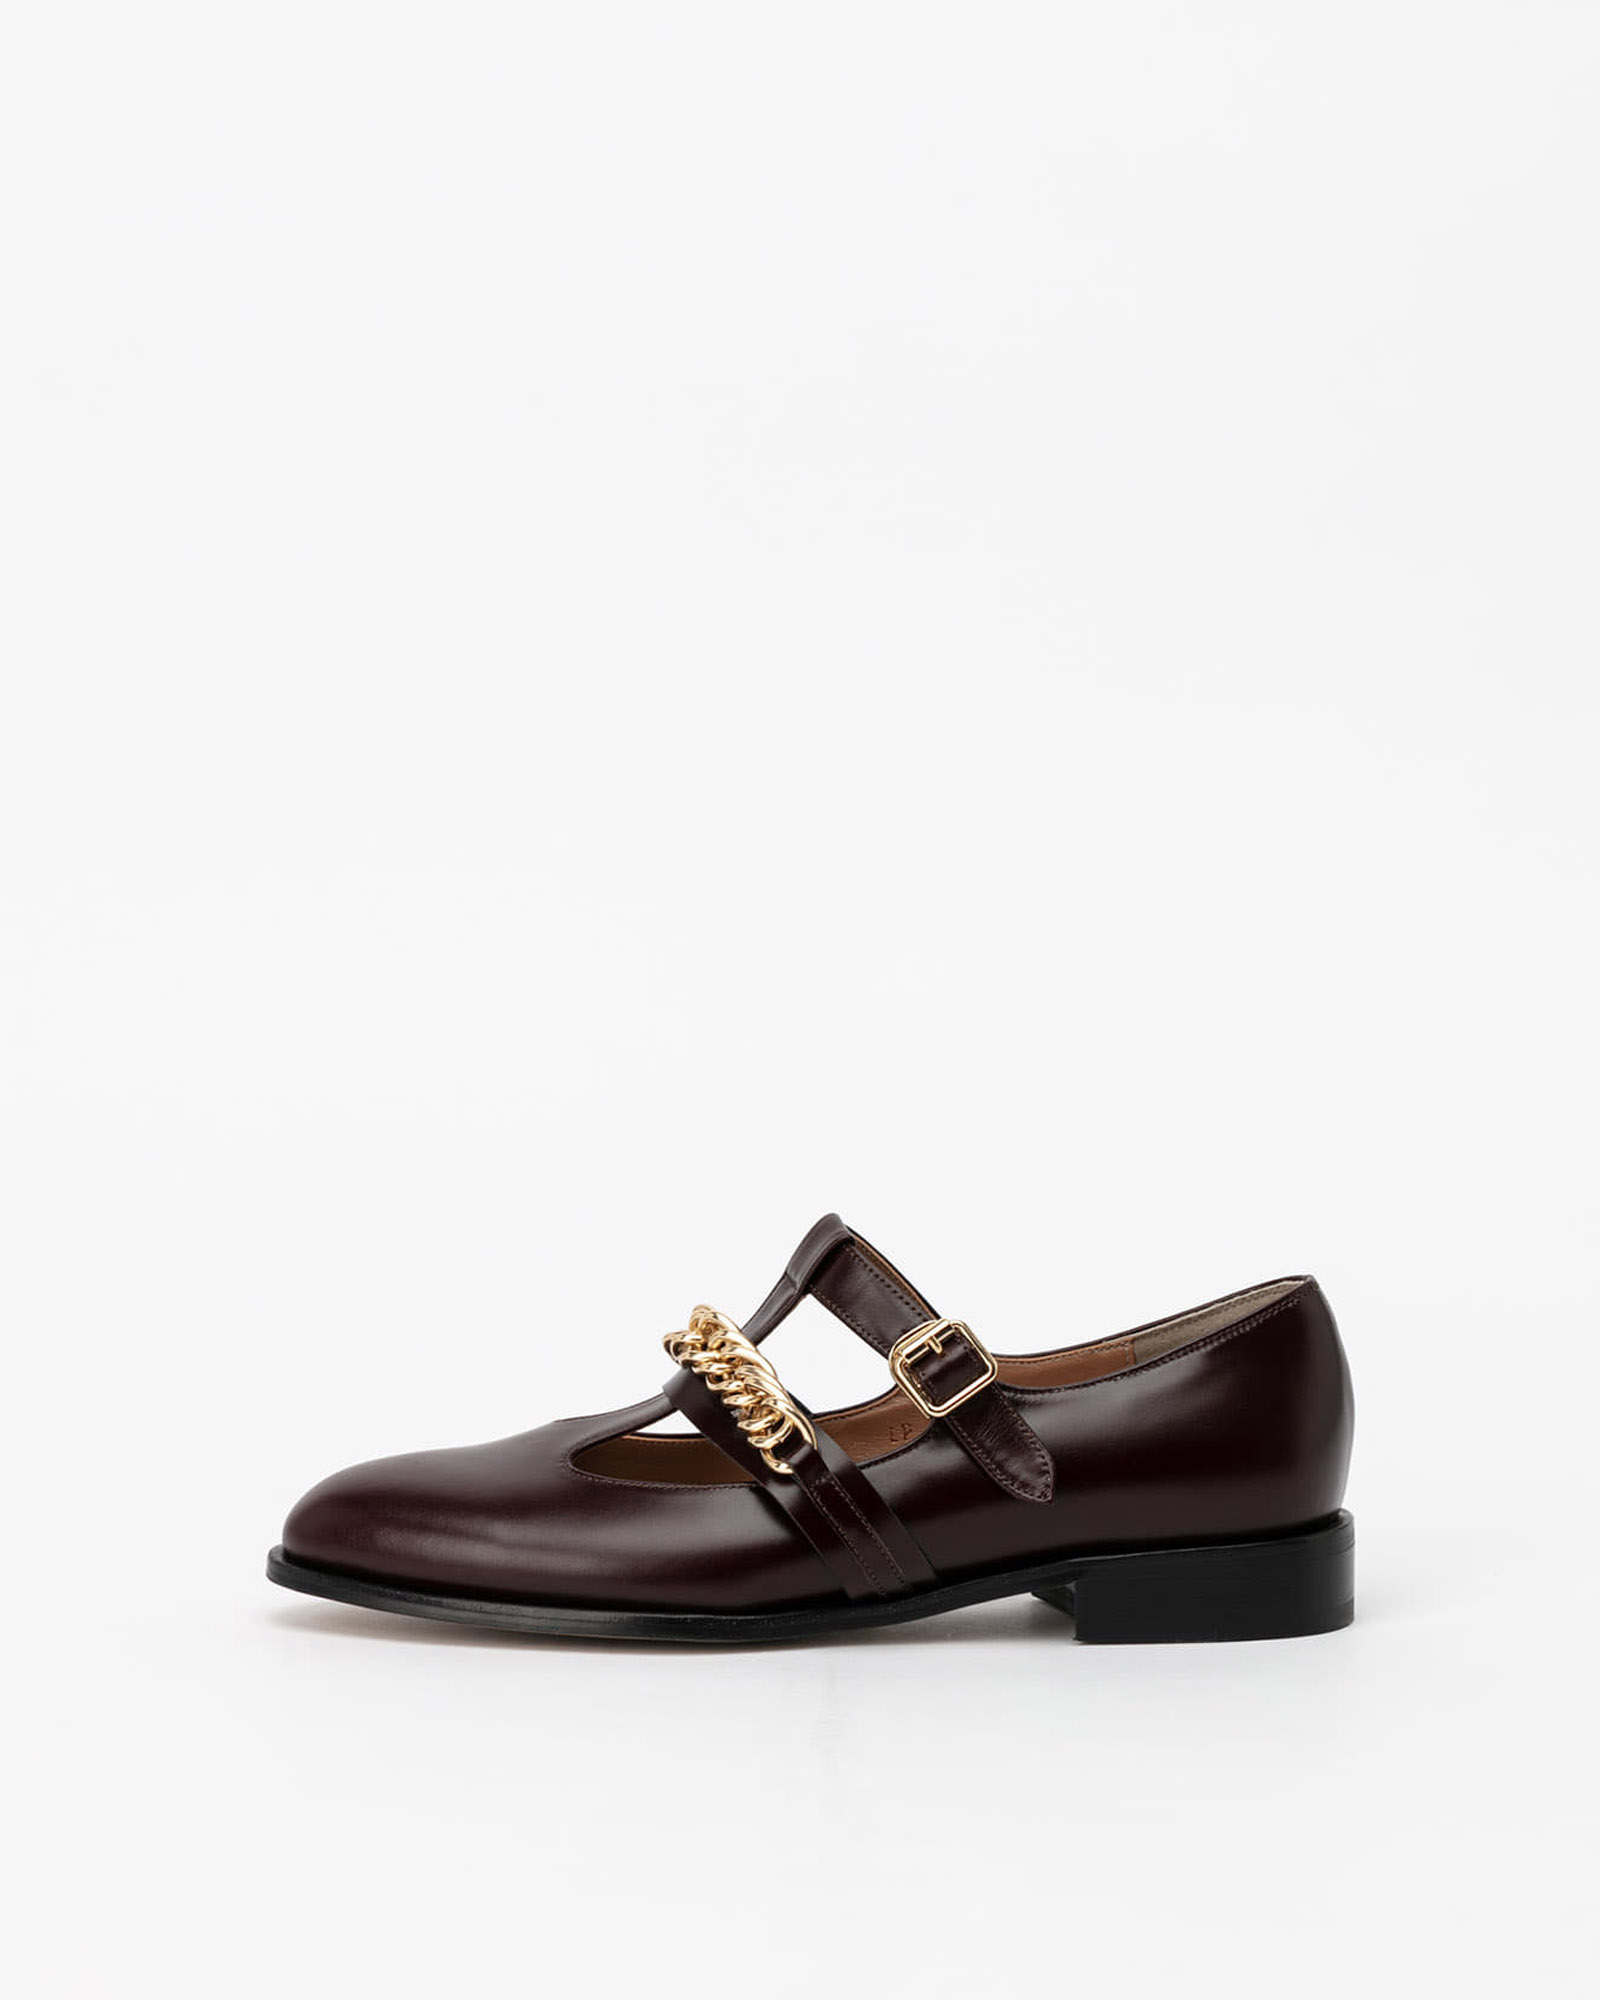 Hellen Chained Loafers in Cherry Brown